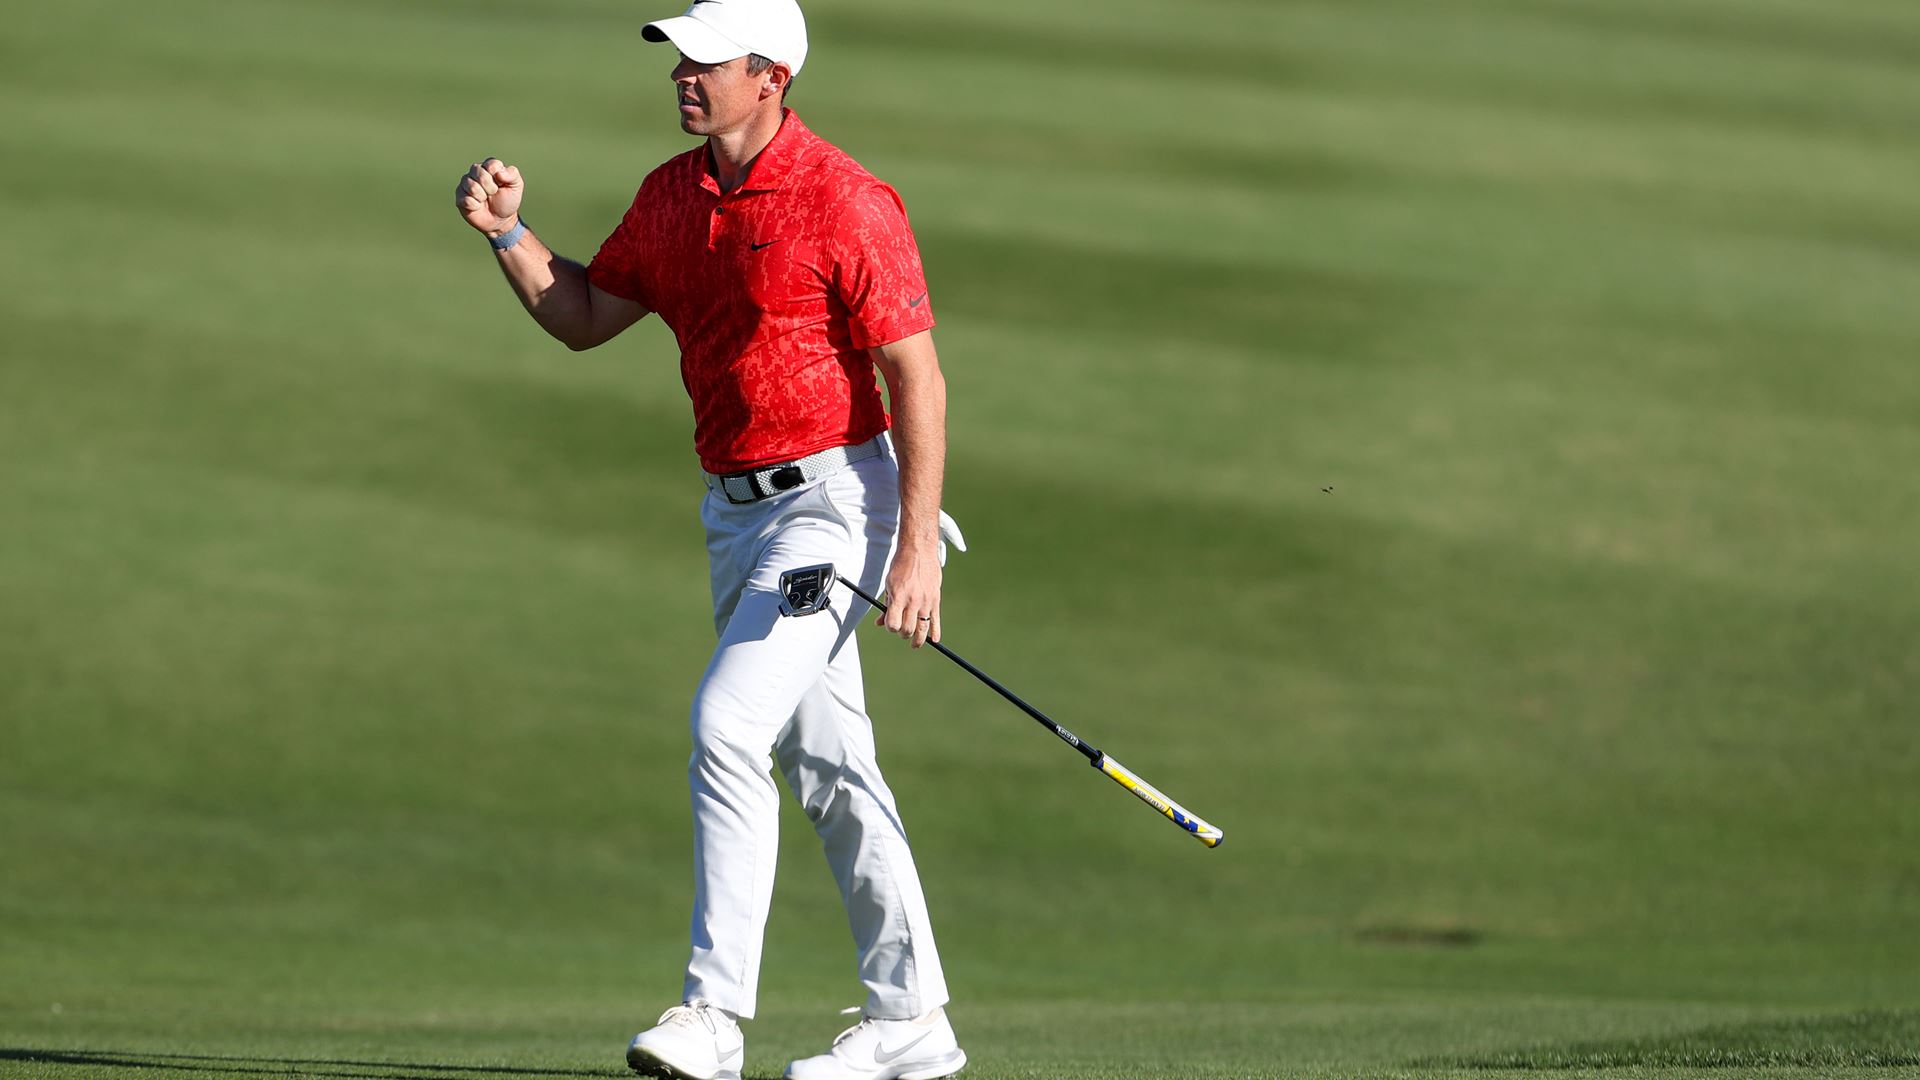 Rory McIlroy Secures 20th PGA TOUR Title Winning THE CJ CUP With SIM2 Driver and TP5x